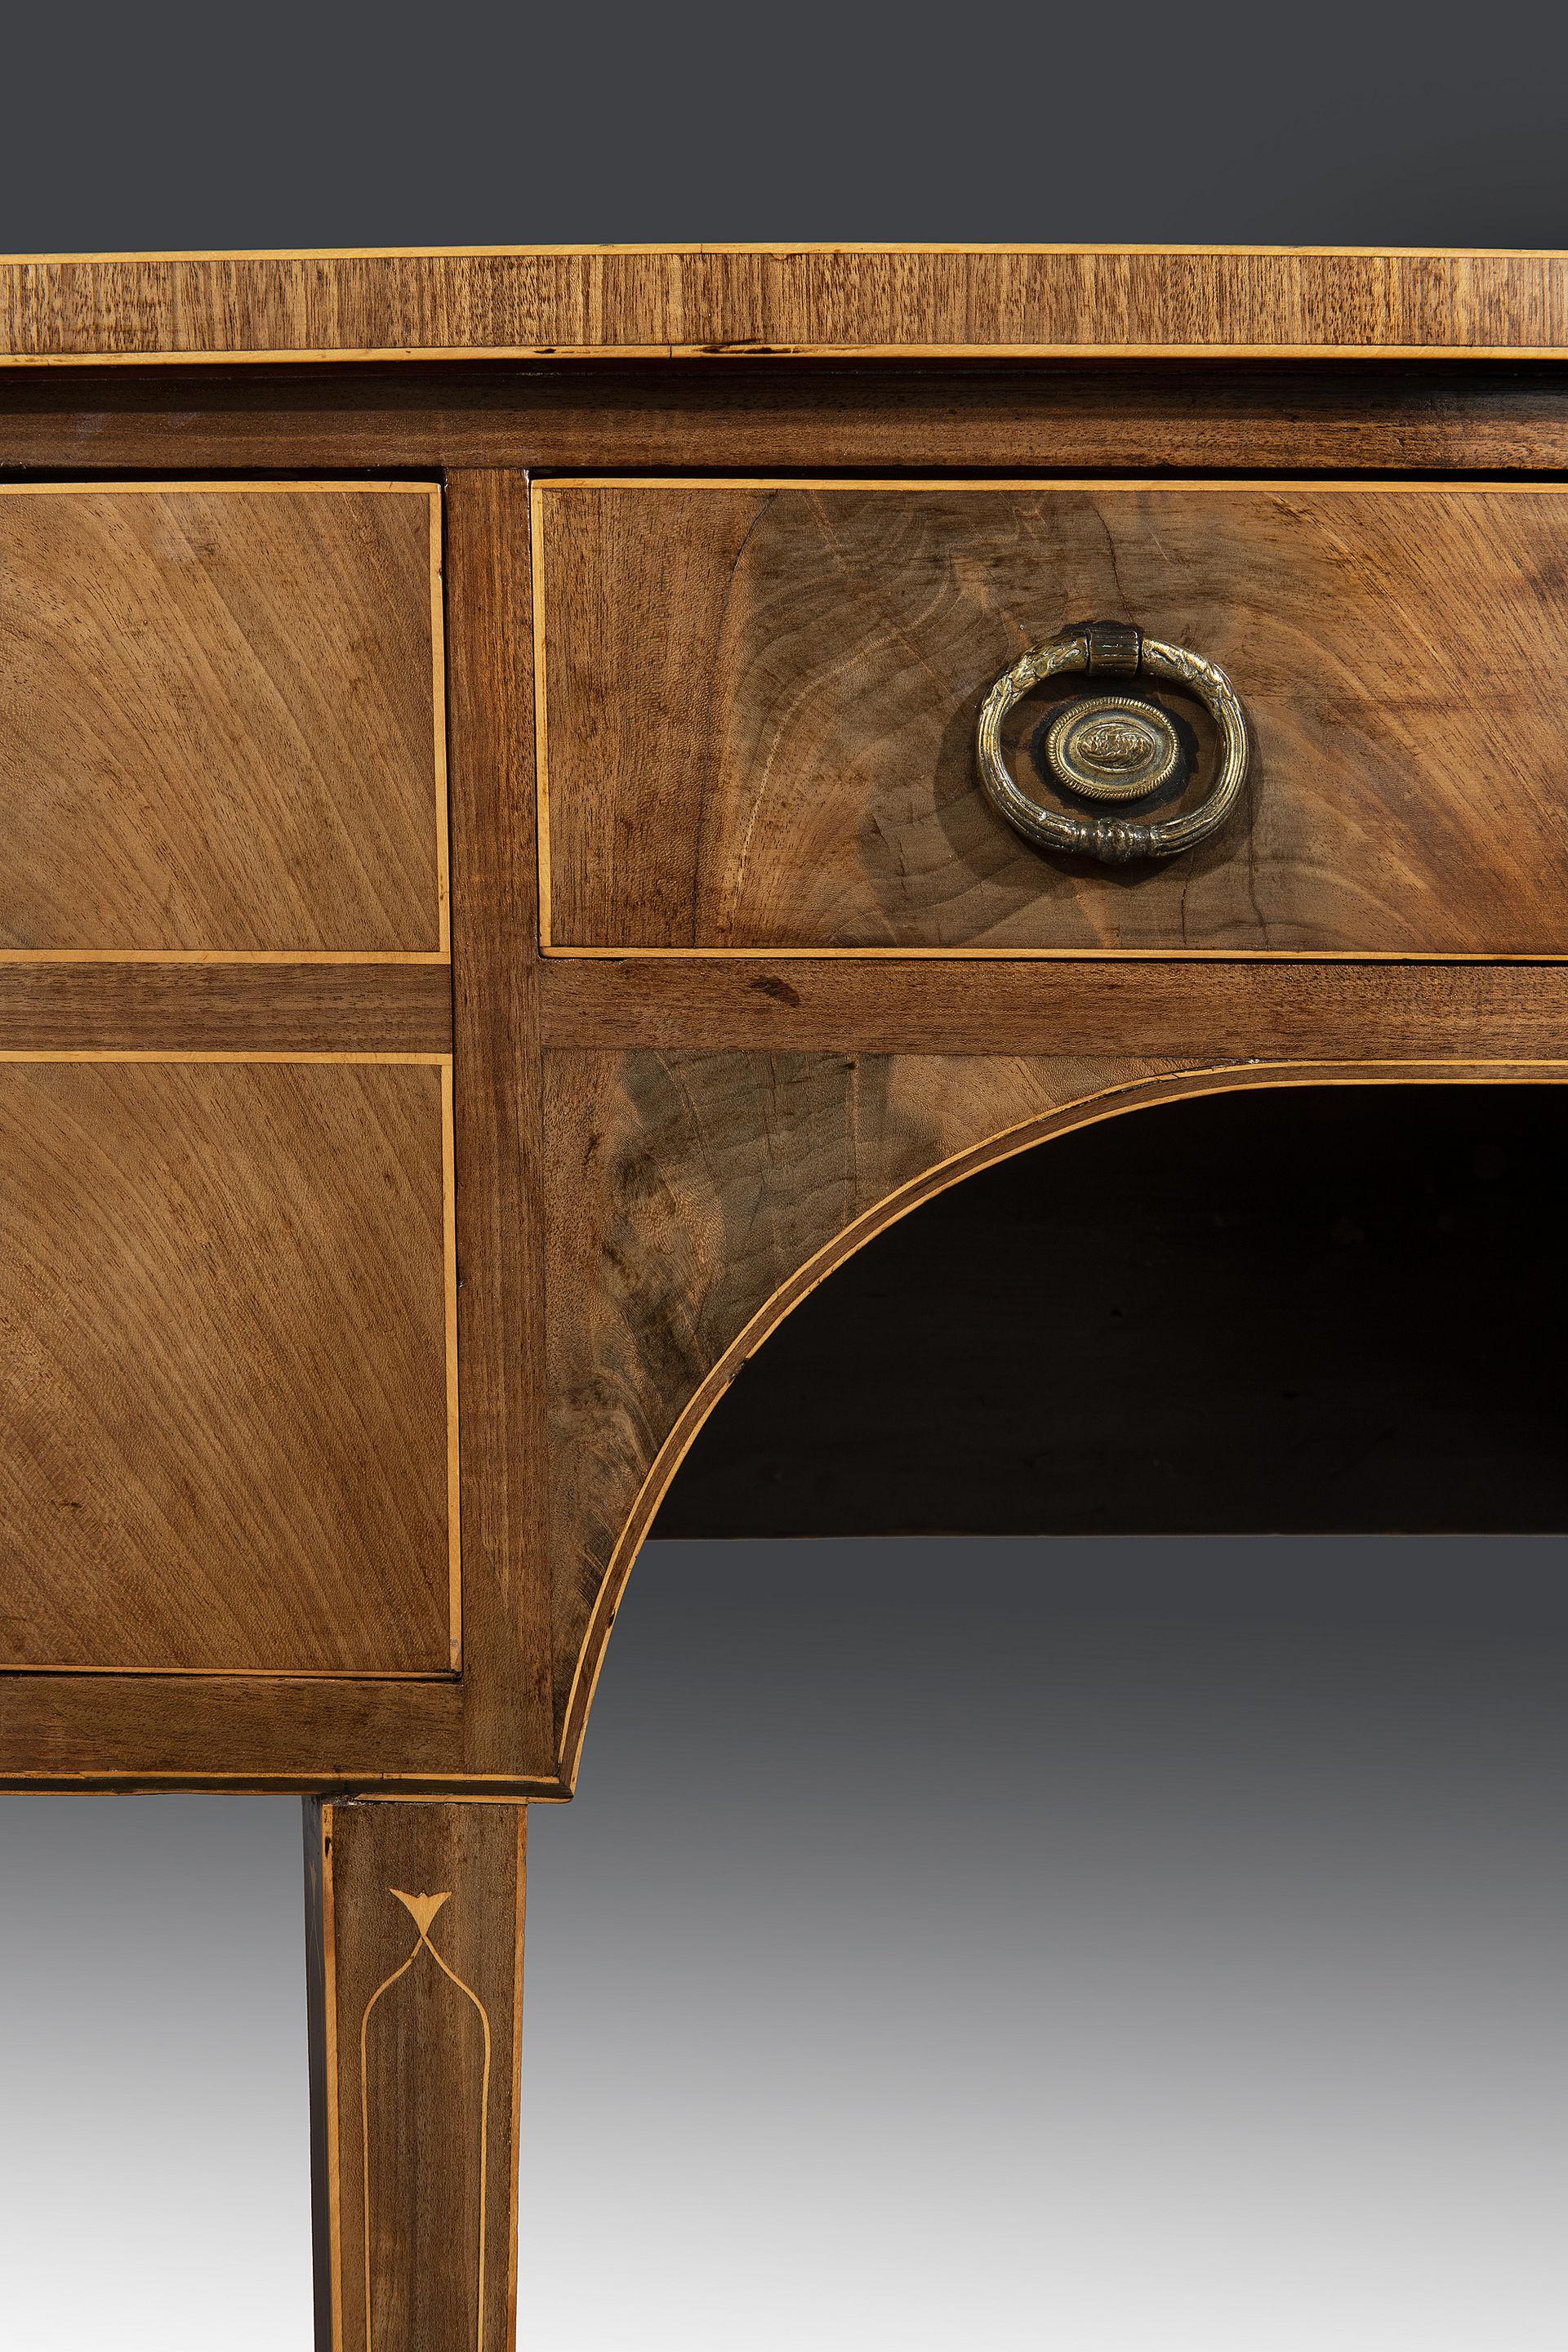 The mahogany top has a faded golden color that retains a lively grain to the veneer above a cross-banded boxwood strung edge. The flamed mahogany drawers are book-matched and strung in boxwood with satinwood escutcheons and fitted with later